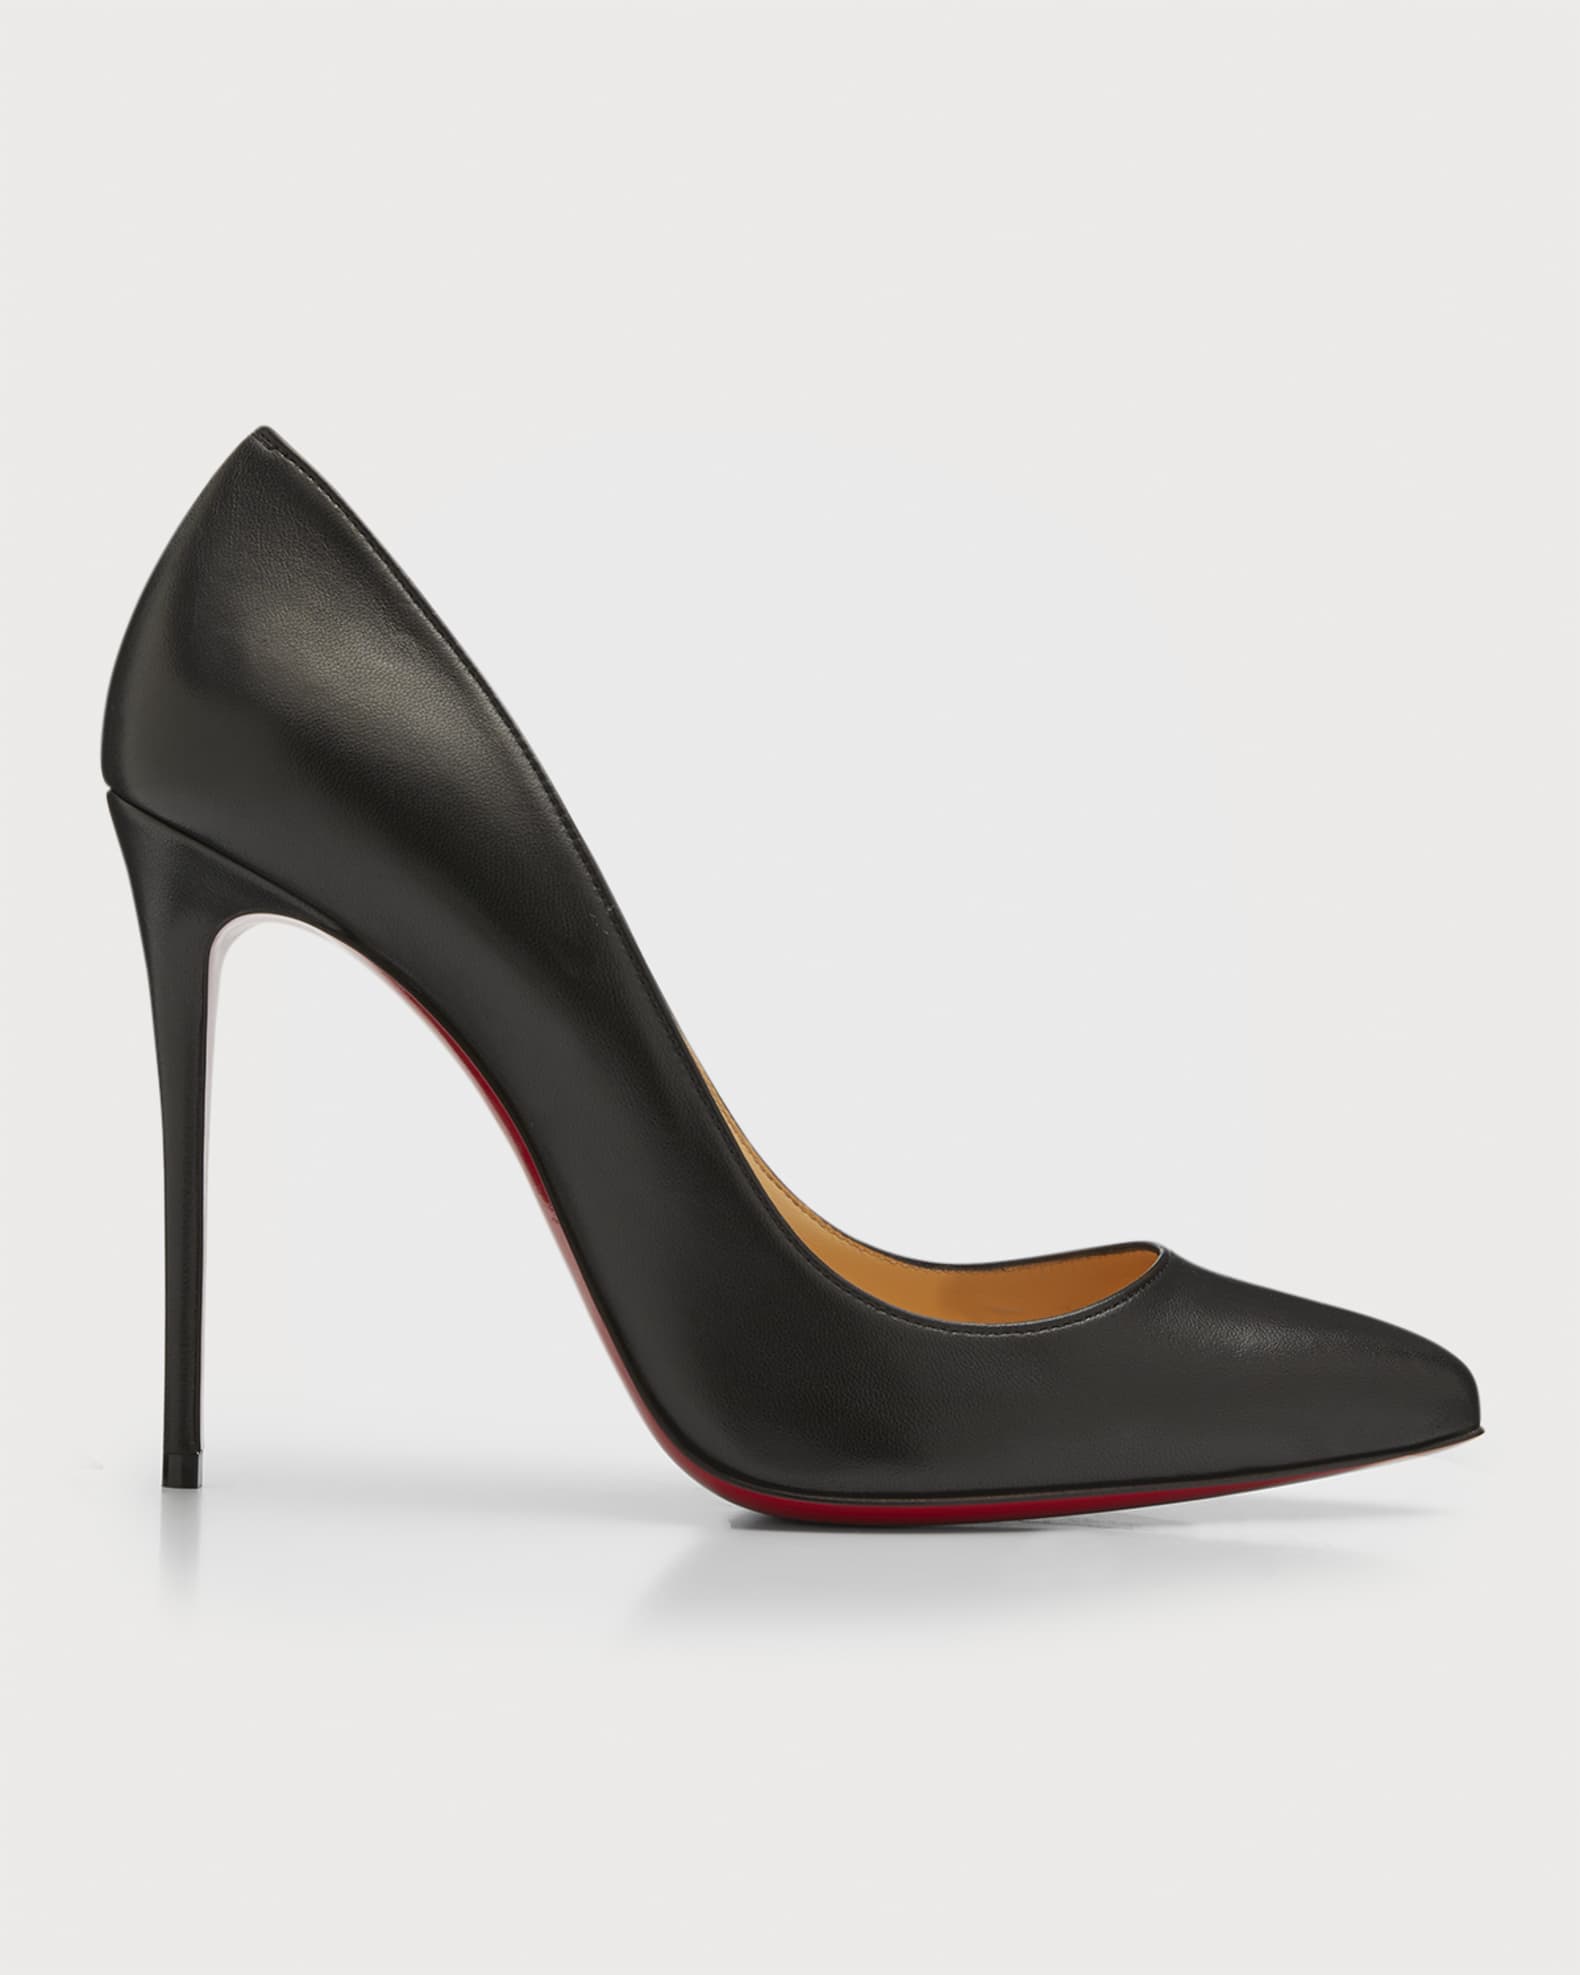 Christian Pigalle Follies Leather Red Sole High-Heel Pumps, Black | Neiman